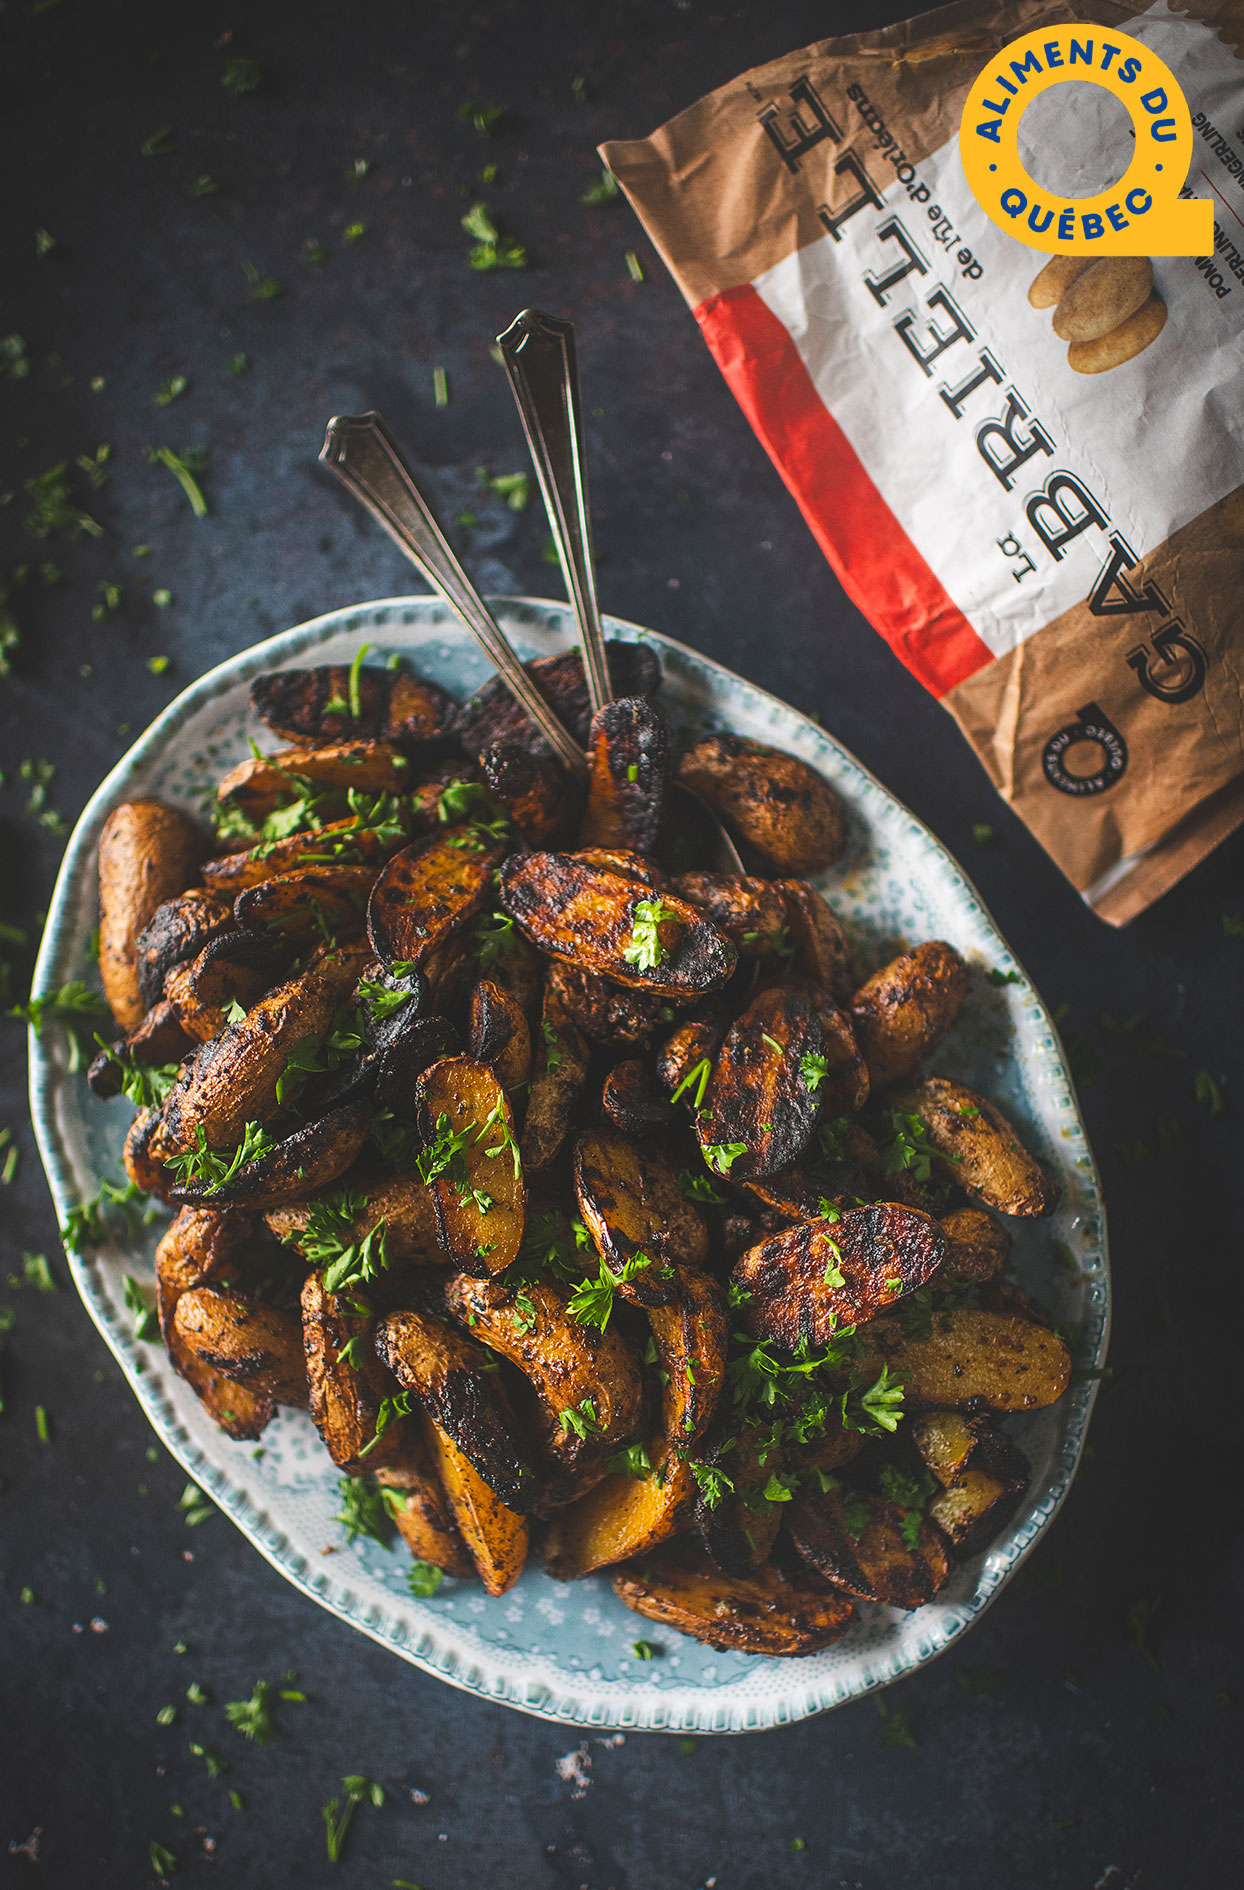 Grilled barbecue potatoes with lemon garlic butter